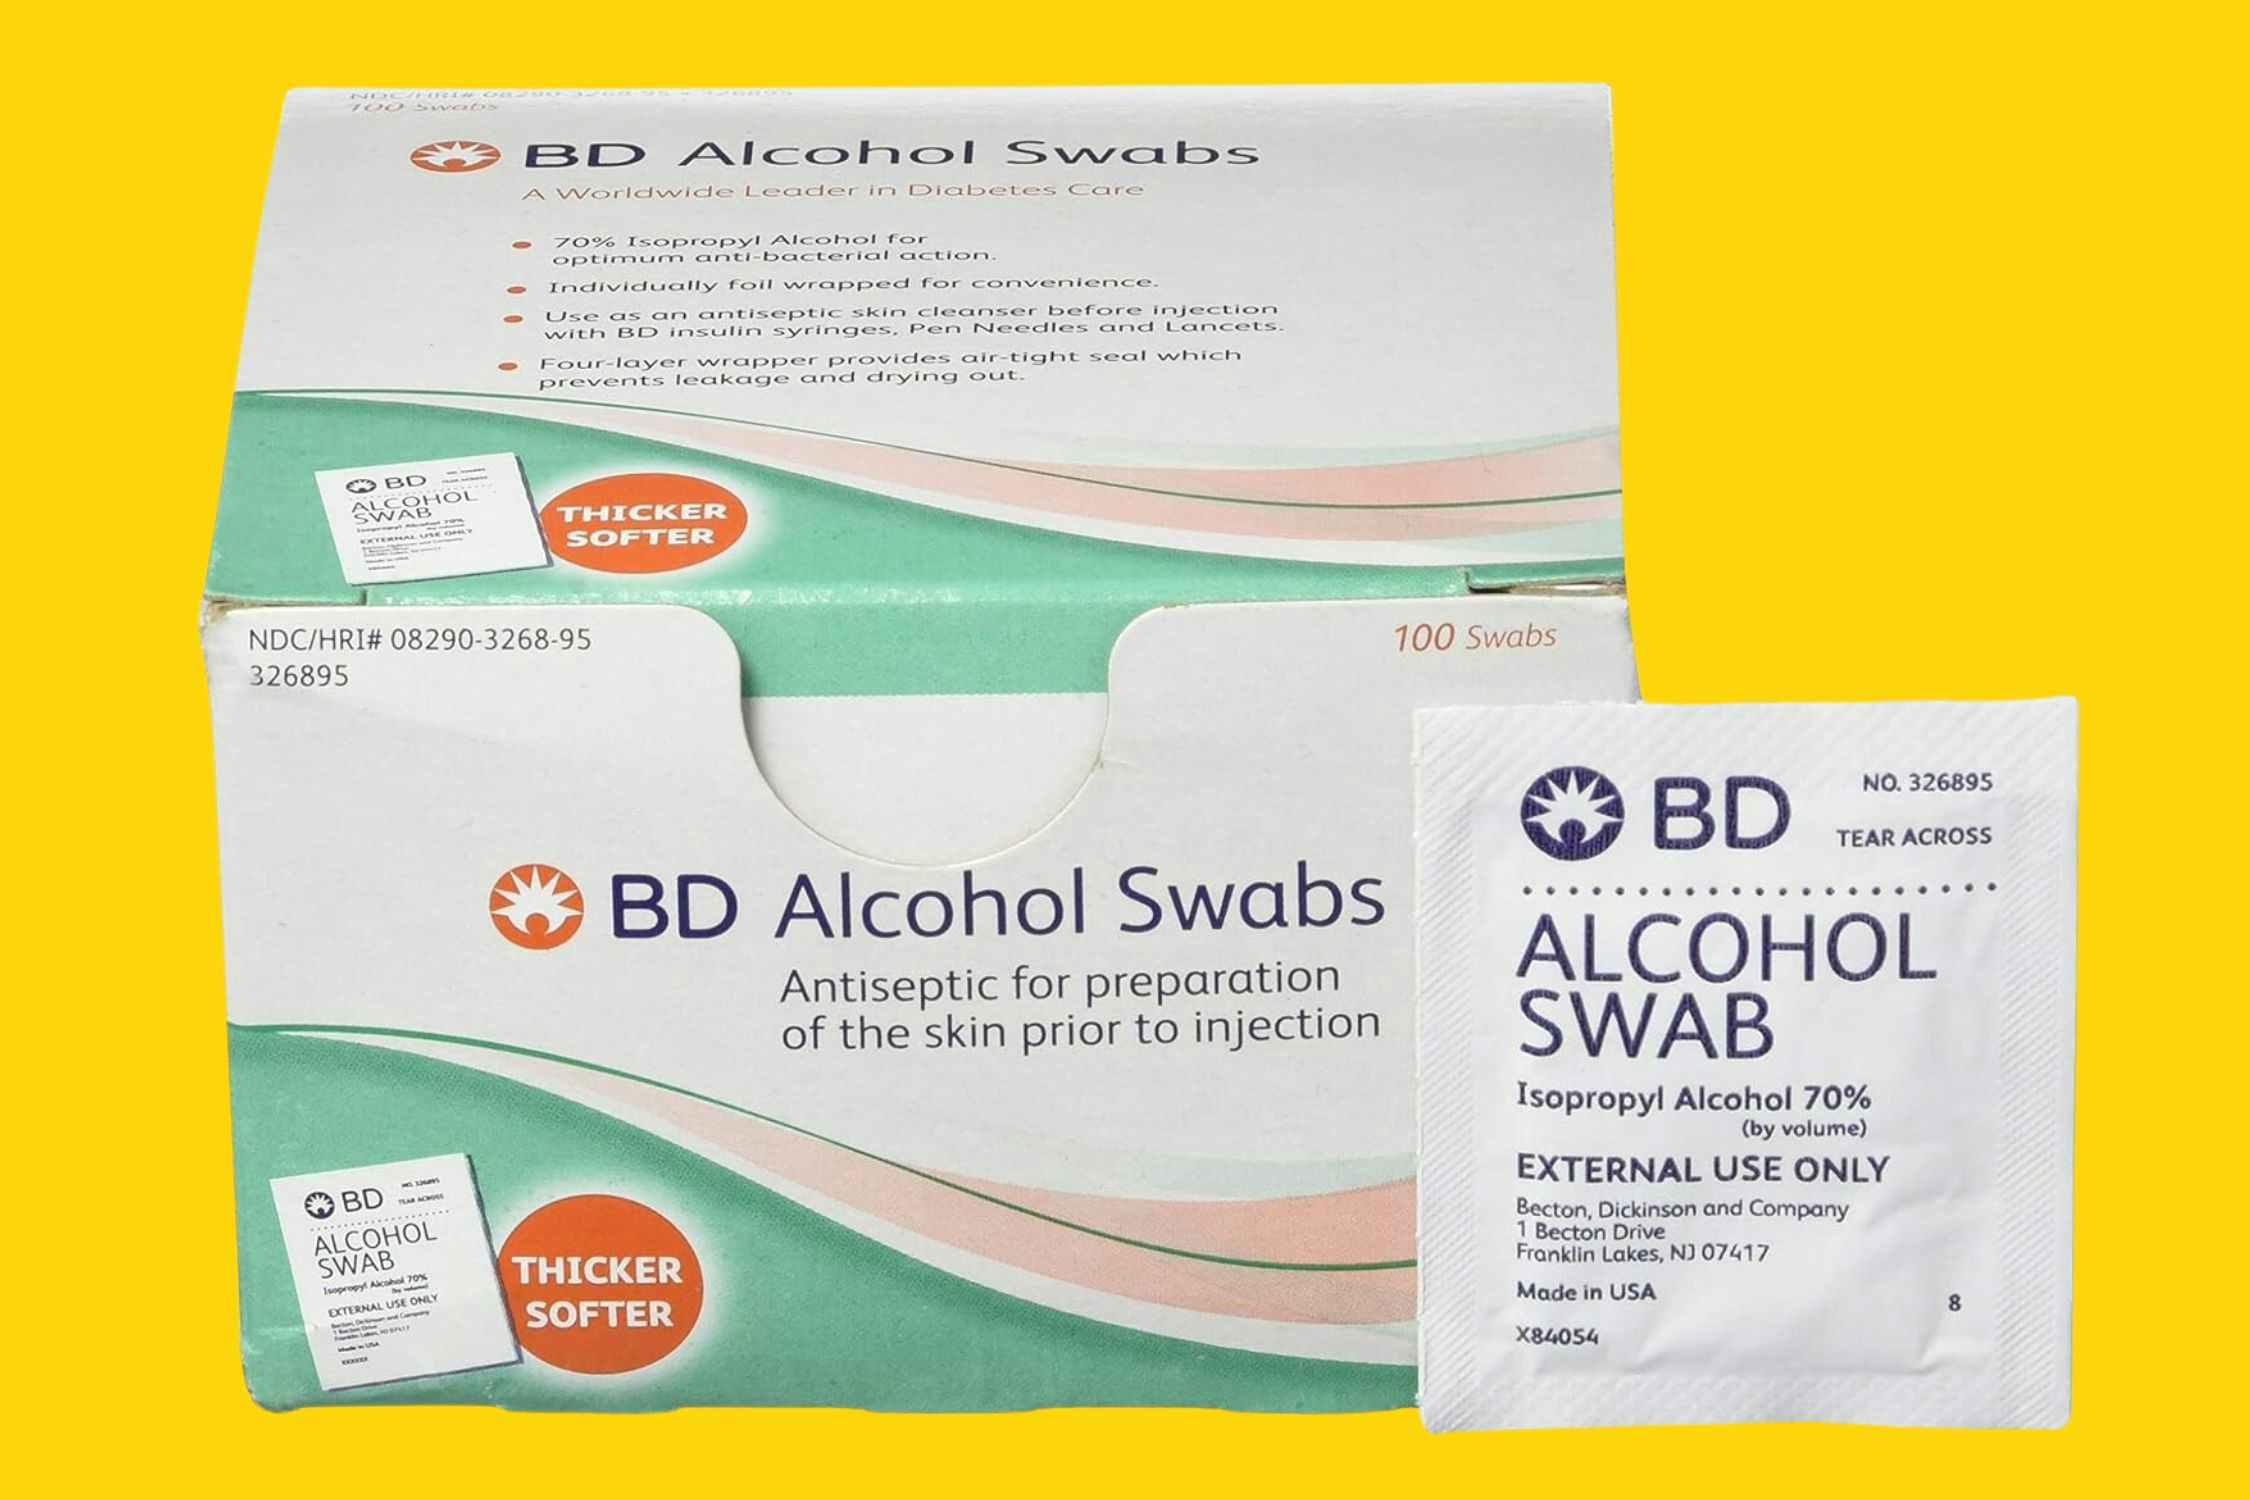 Get 100 Alcohol Swabs for as Low as $2.07 on Amazon